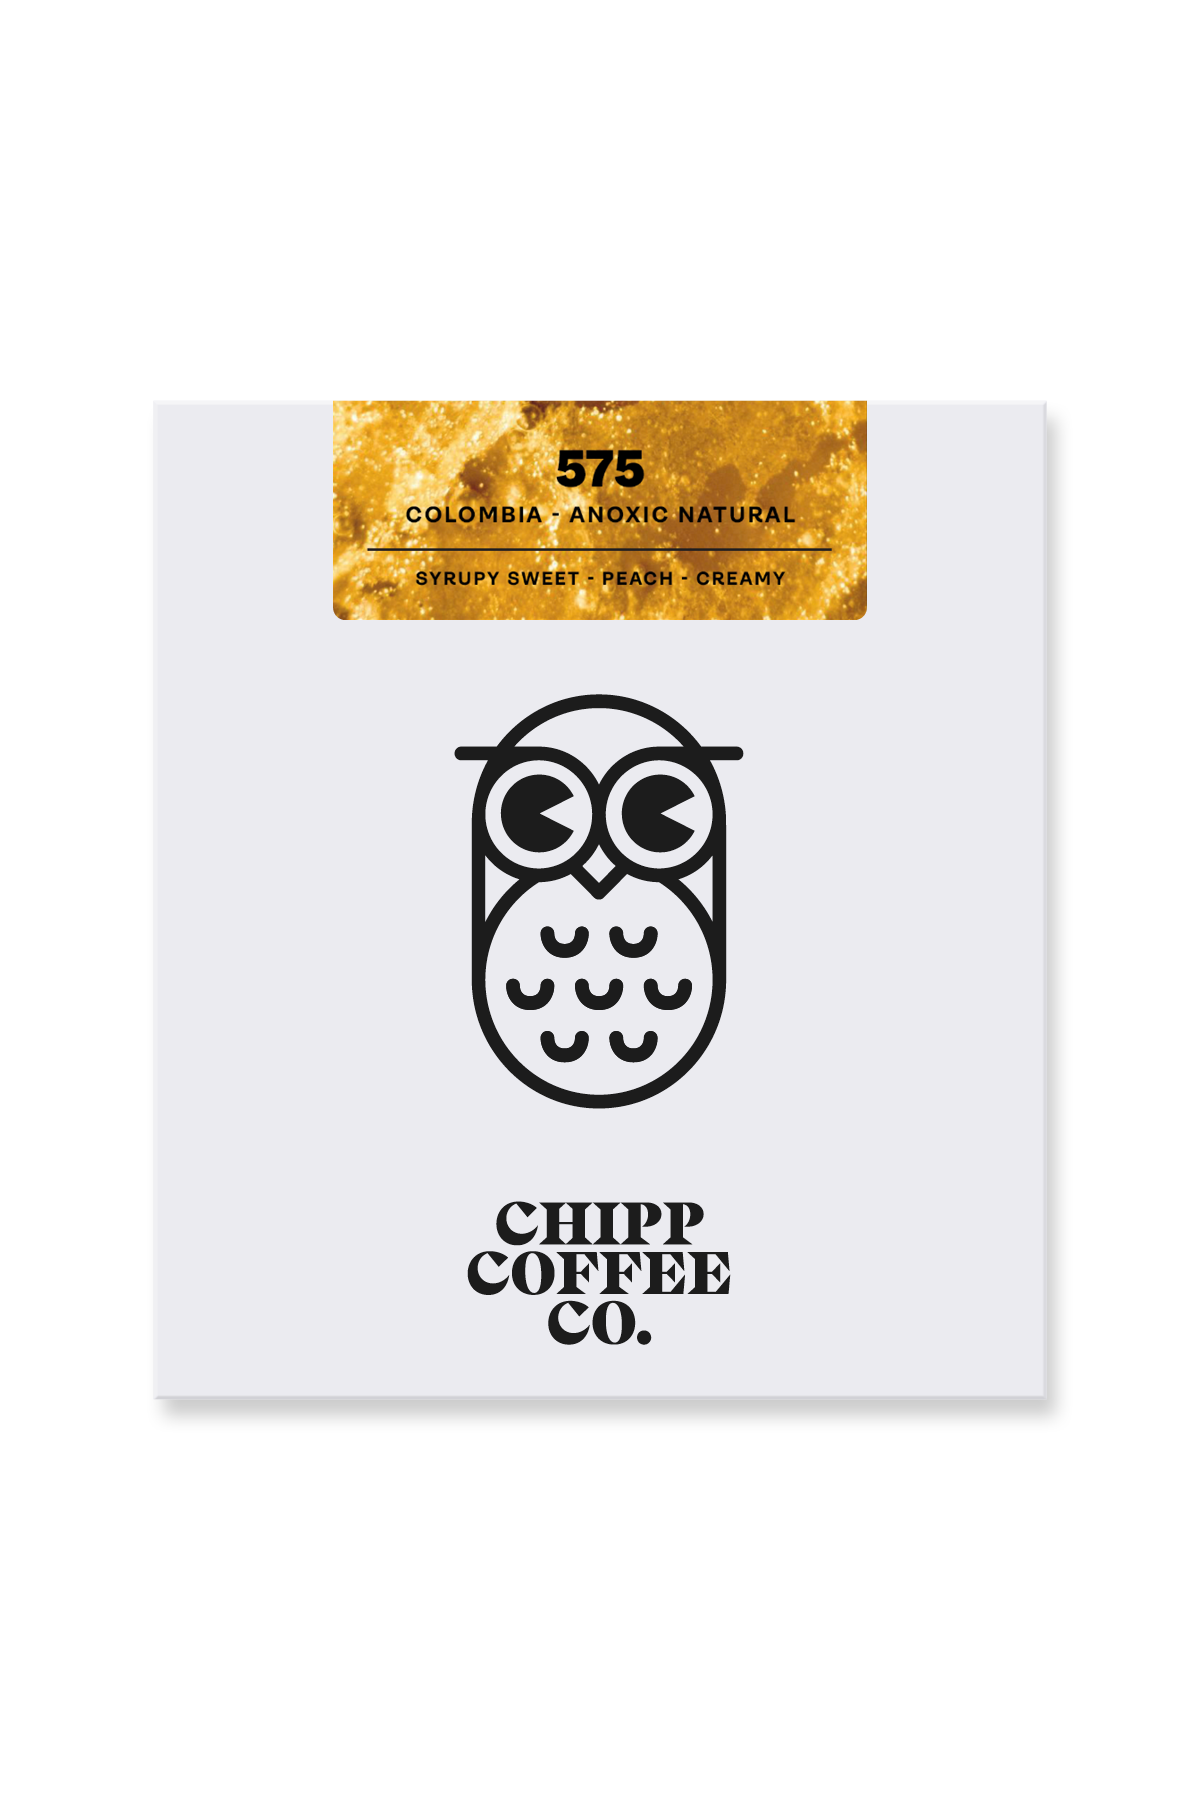 575 - Colombia Anoxic Natural - Chipp Coffee Co